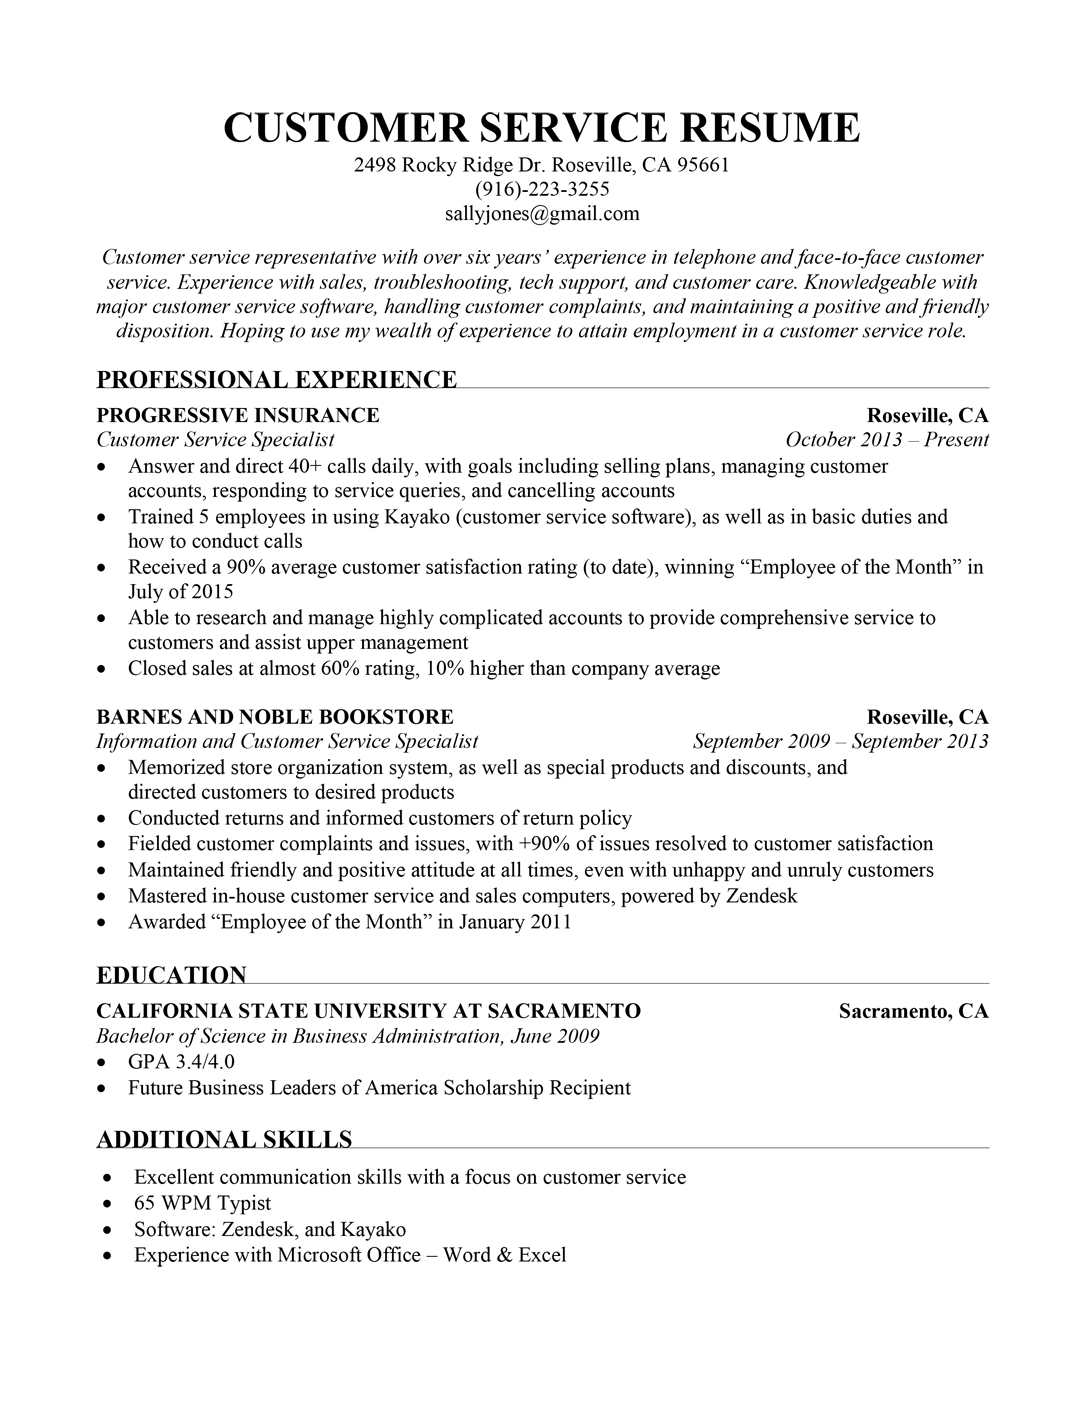 Professional resume services online application